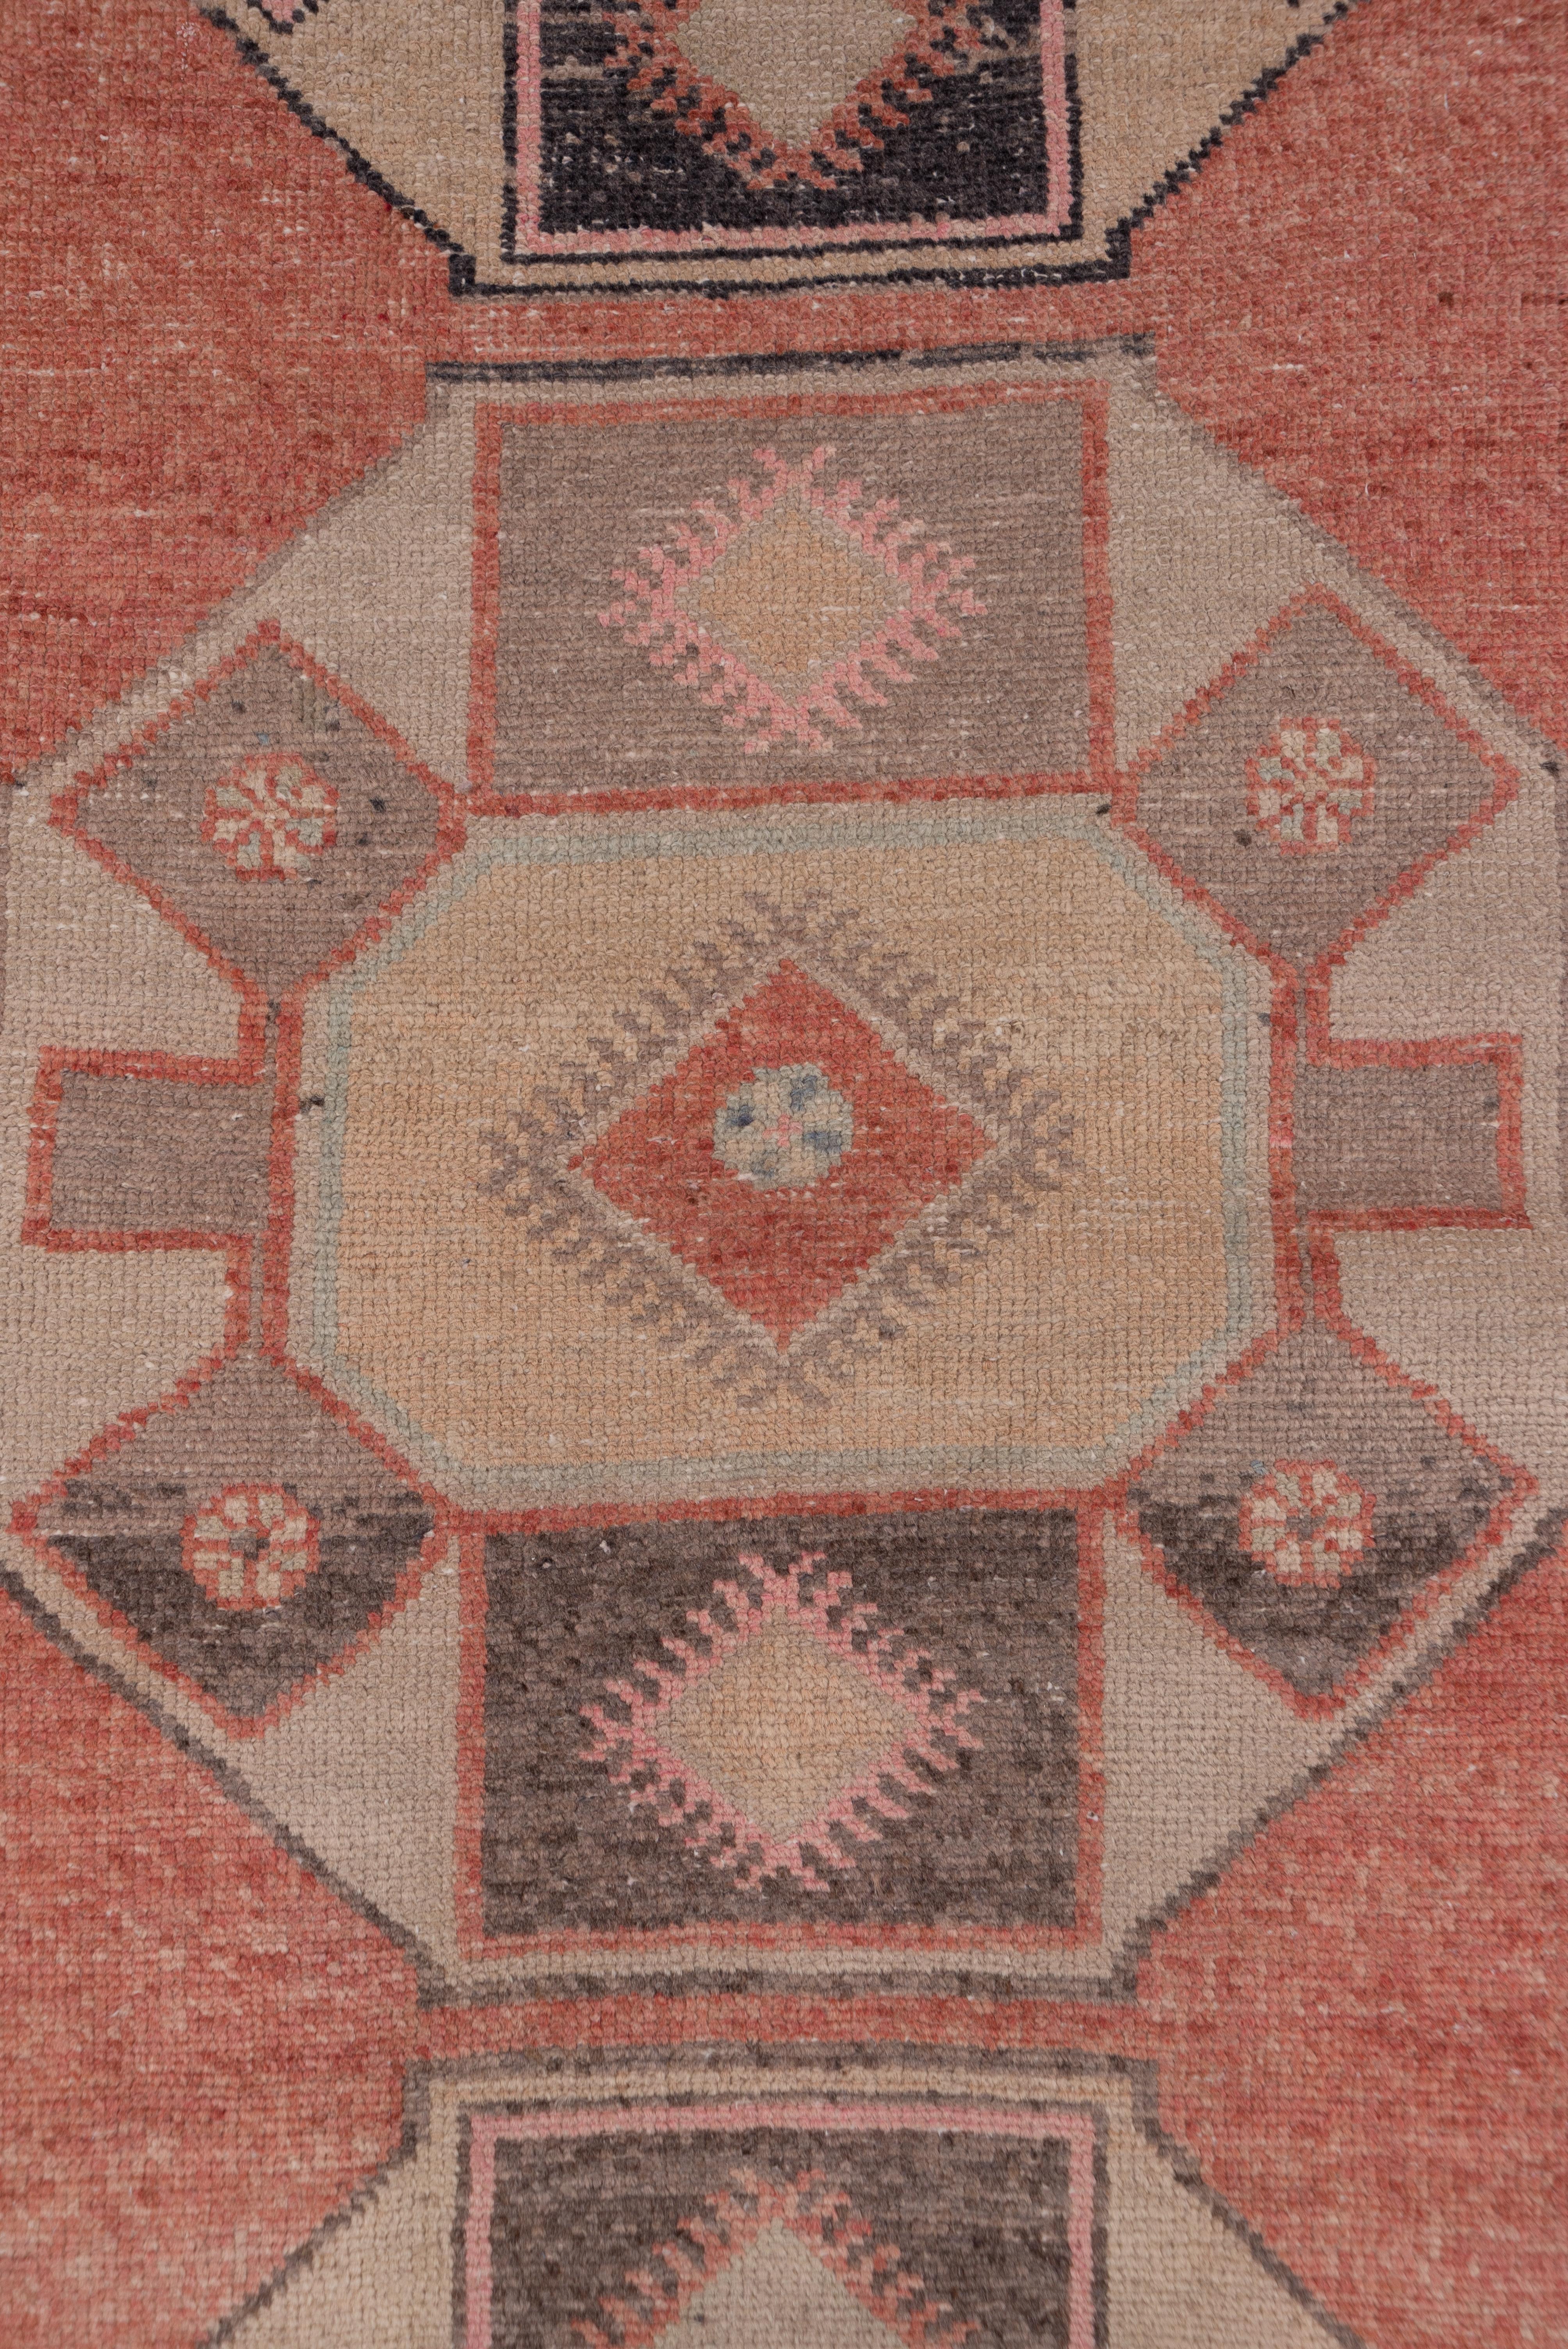 The peachy field displays five octagonal sand medallions with internal flapped octagons in straw, peach and abrashed light brown. The pattern is popular in eastern turkey with the Kurdish Yuruk nomads.